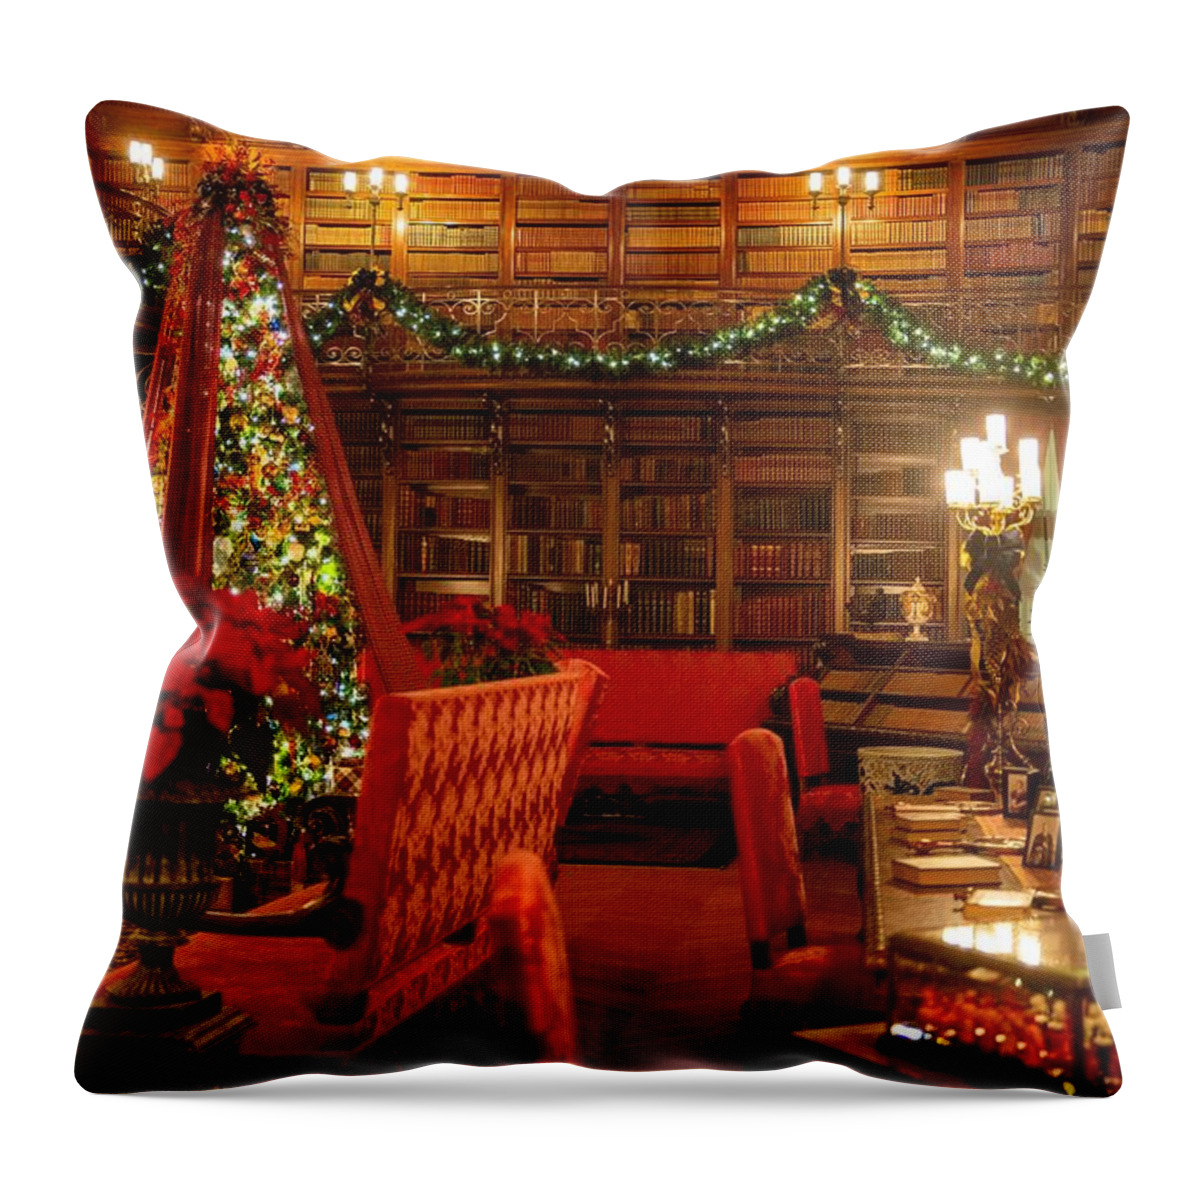 Diane Lindon Coy Throw Pillow featuring the photograph Christmas at Biltmore Four by Diane Lindon Coy